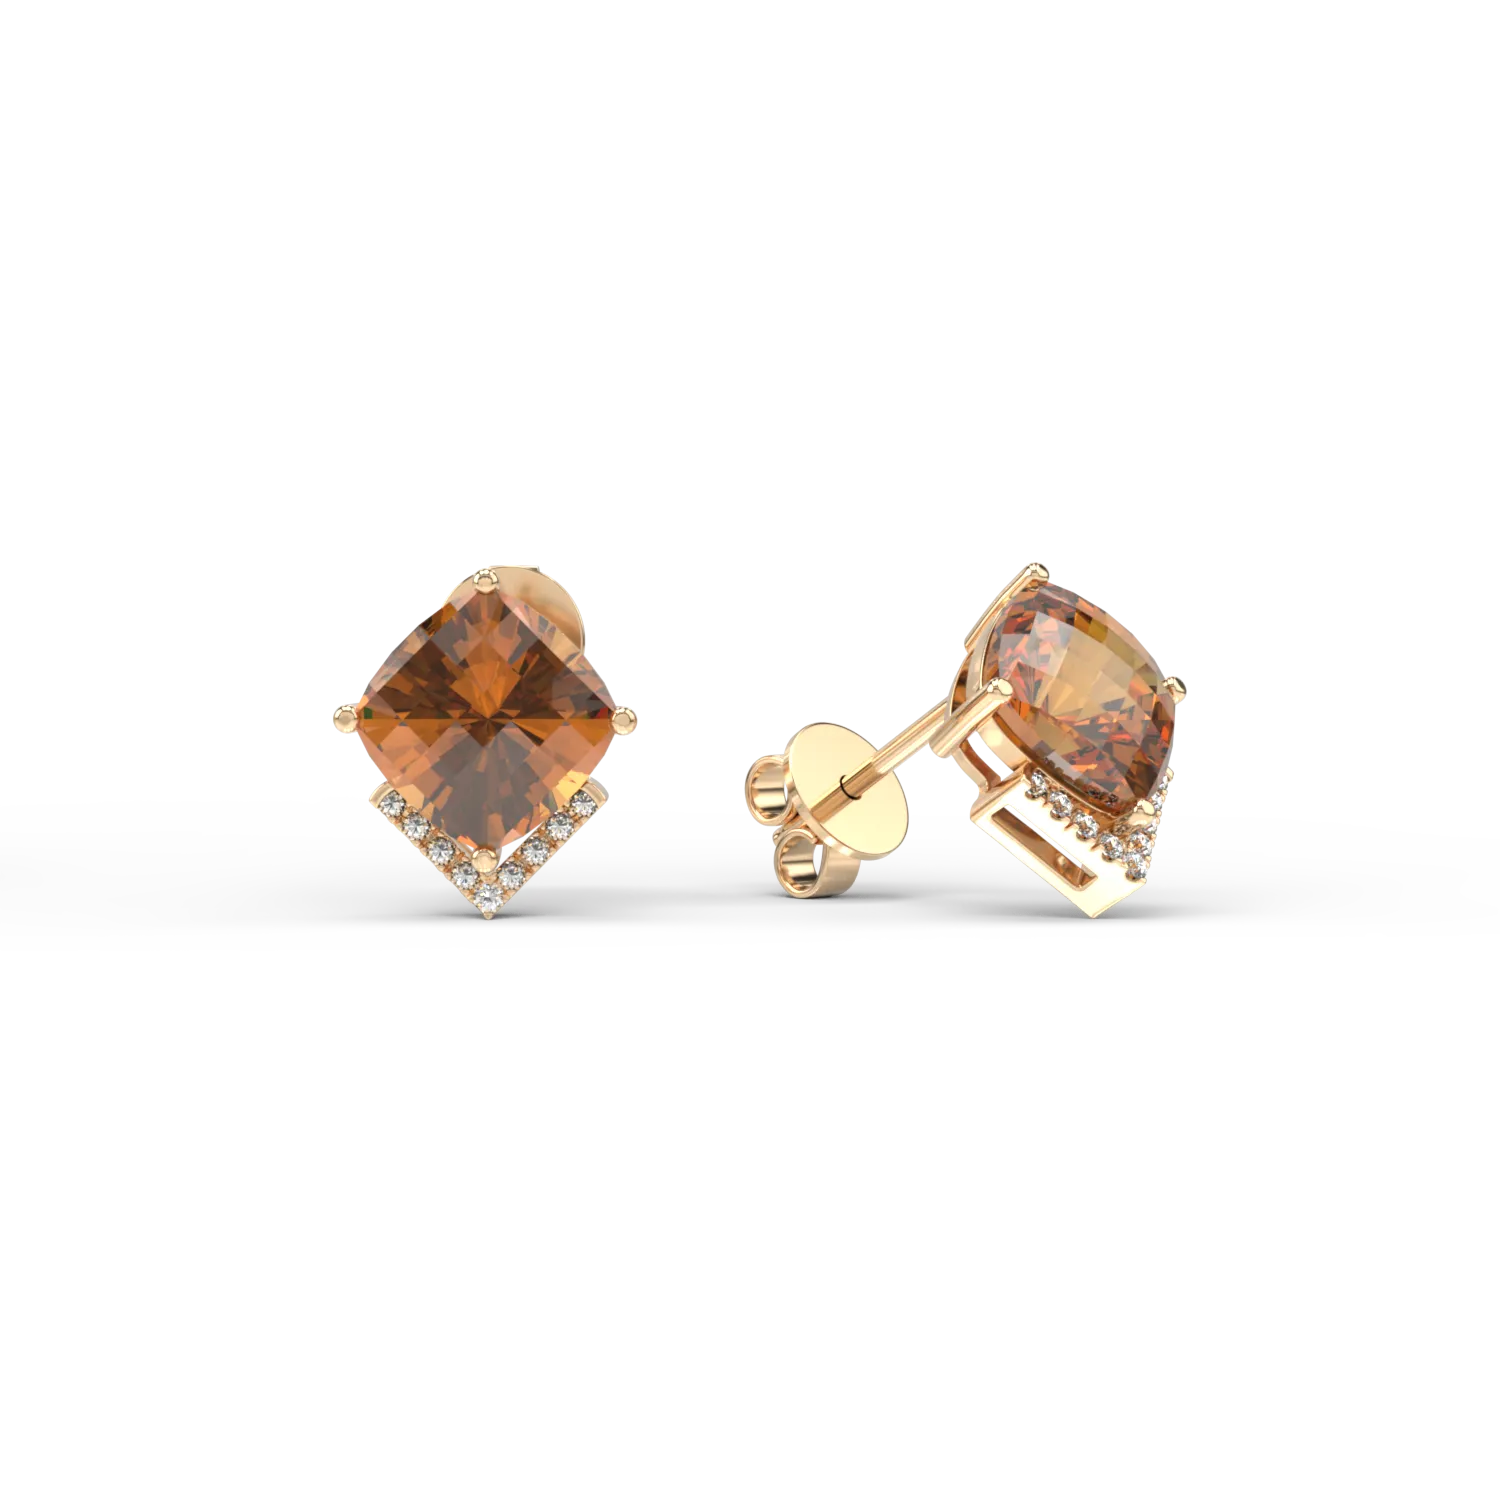 18K yellow gold earrings with 5ct citrine and 0.1ct diamonds